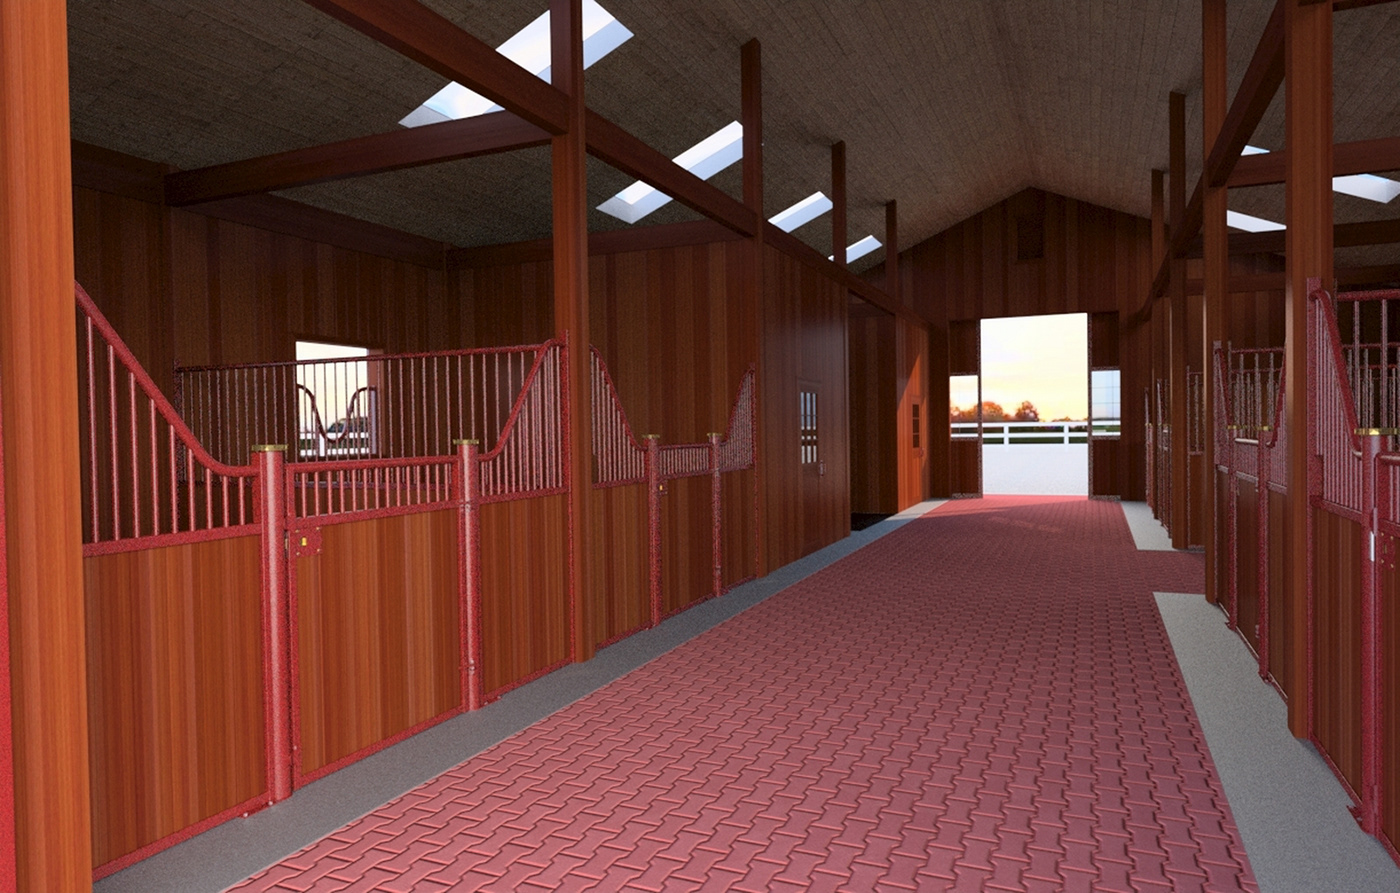 barns stables horse stalls ranch estate architecture Renderings blueprints equestrian steelworks